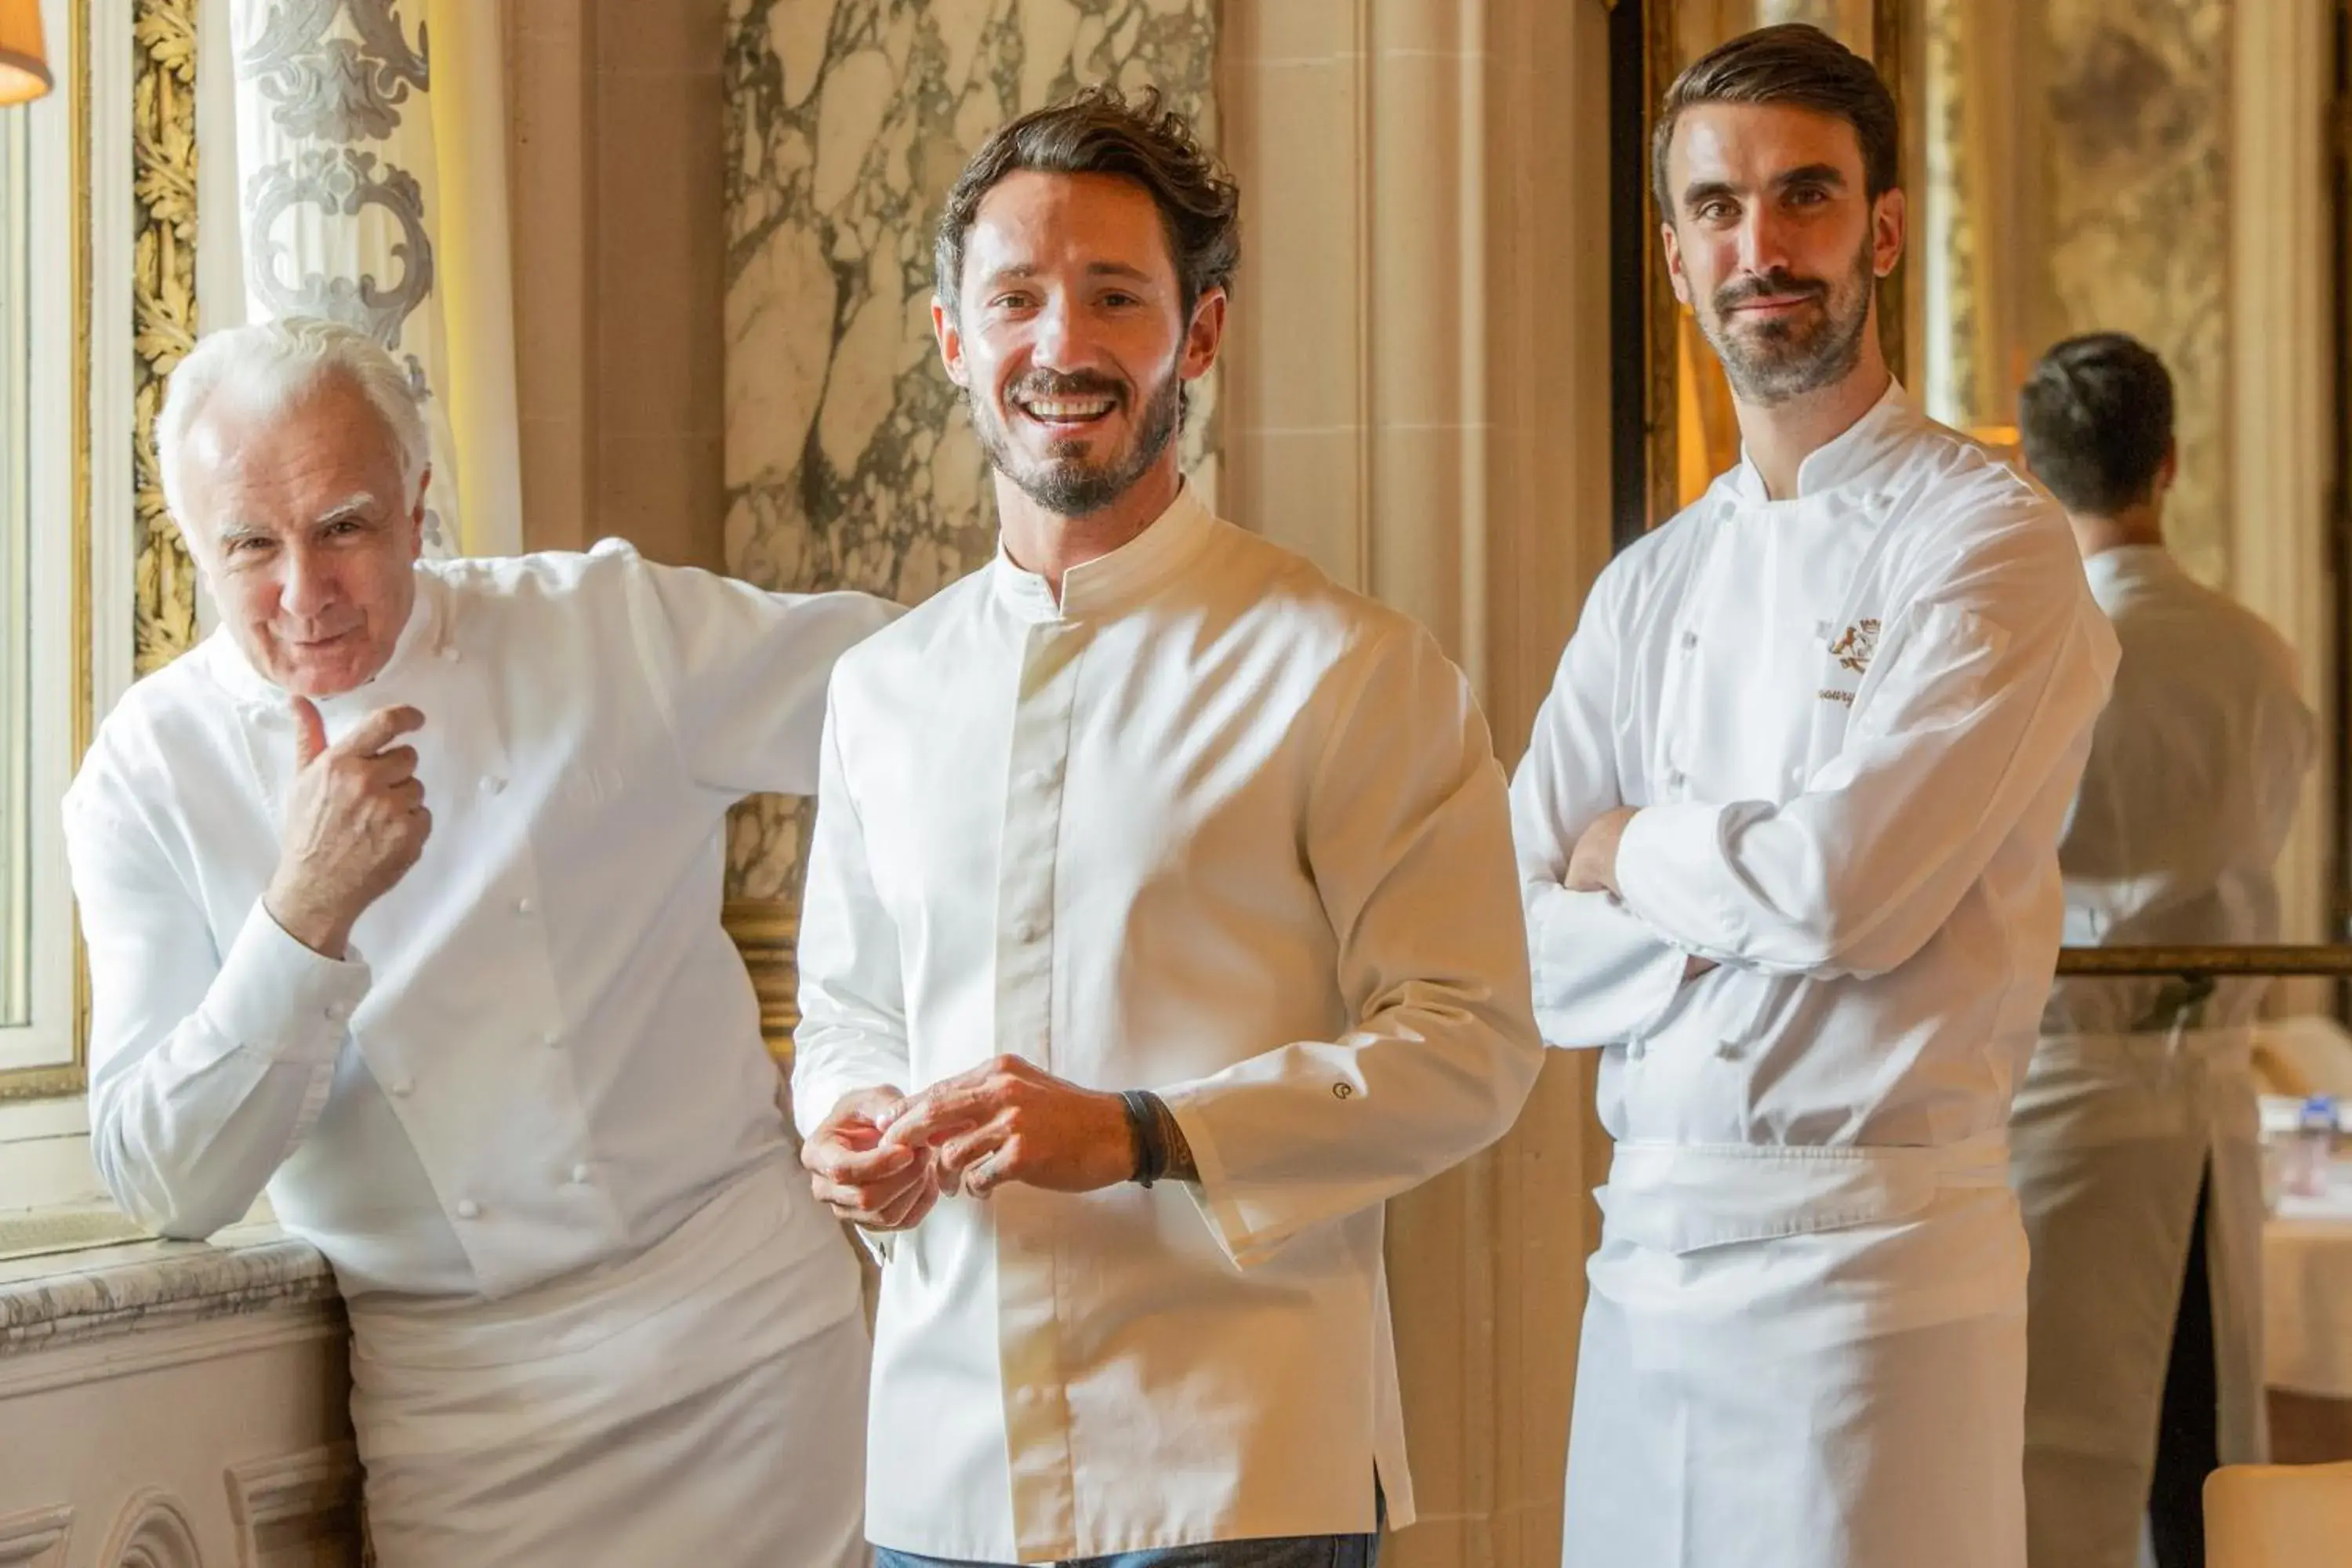 Staff in Le Meurice - Dorchester Collection